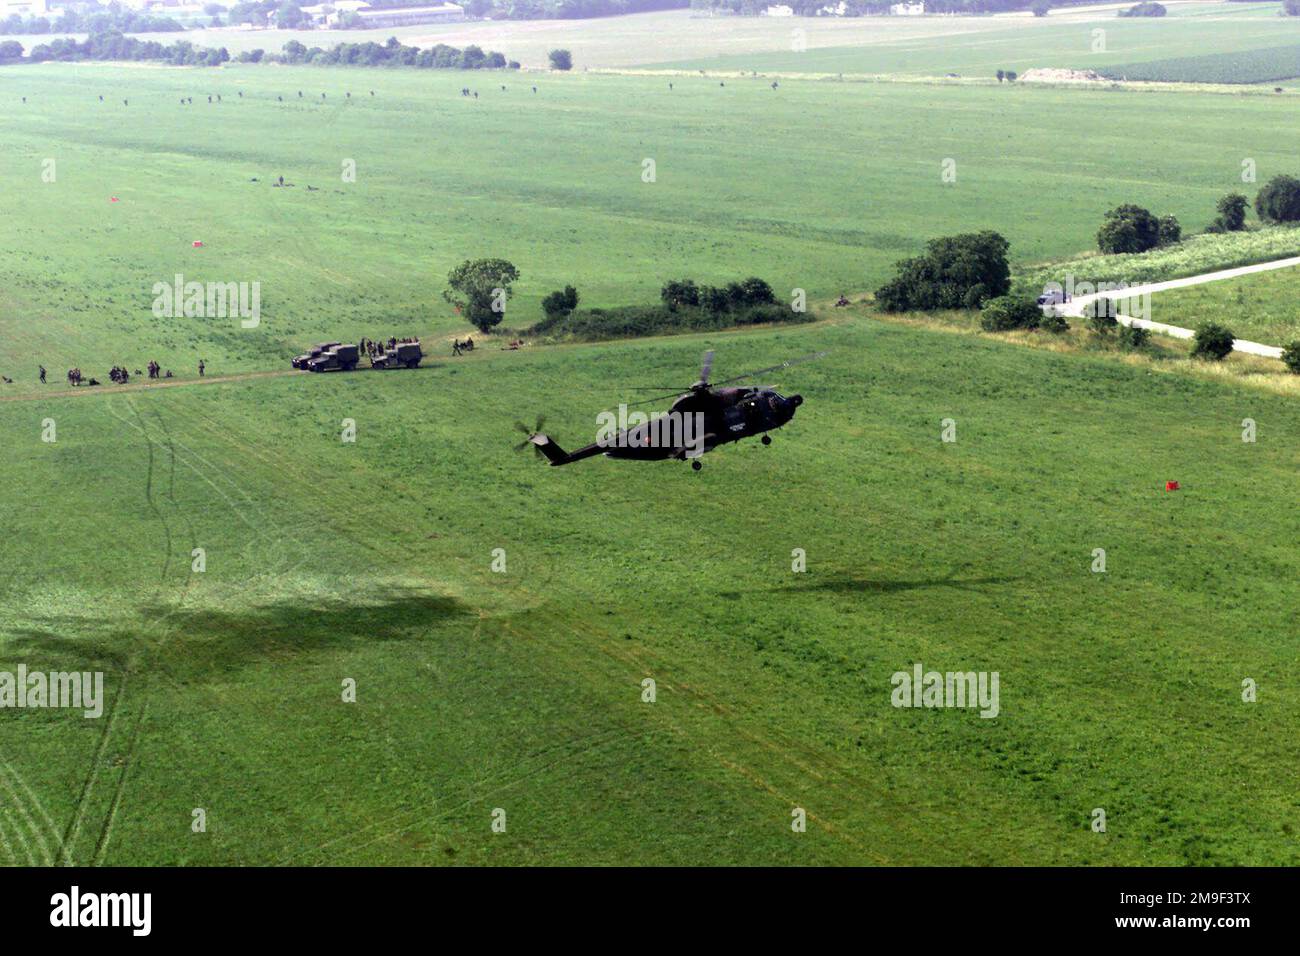 An Italian H-3, of the 15th Squadron, from Rimini, performs Combat Search And Resue or CSAR. The helicopter flares out as it prepares to pick up survivors during Exercise VENETO RESCUE June 6th, 2000. Subject Operation/Series: VENETO RESCUE Base: Aviano Air Base State: Pordenone Country: Italy (ITA) Stock Photo